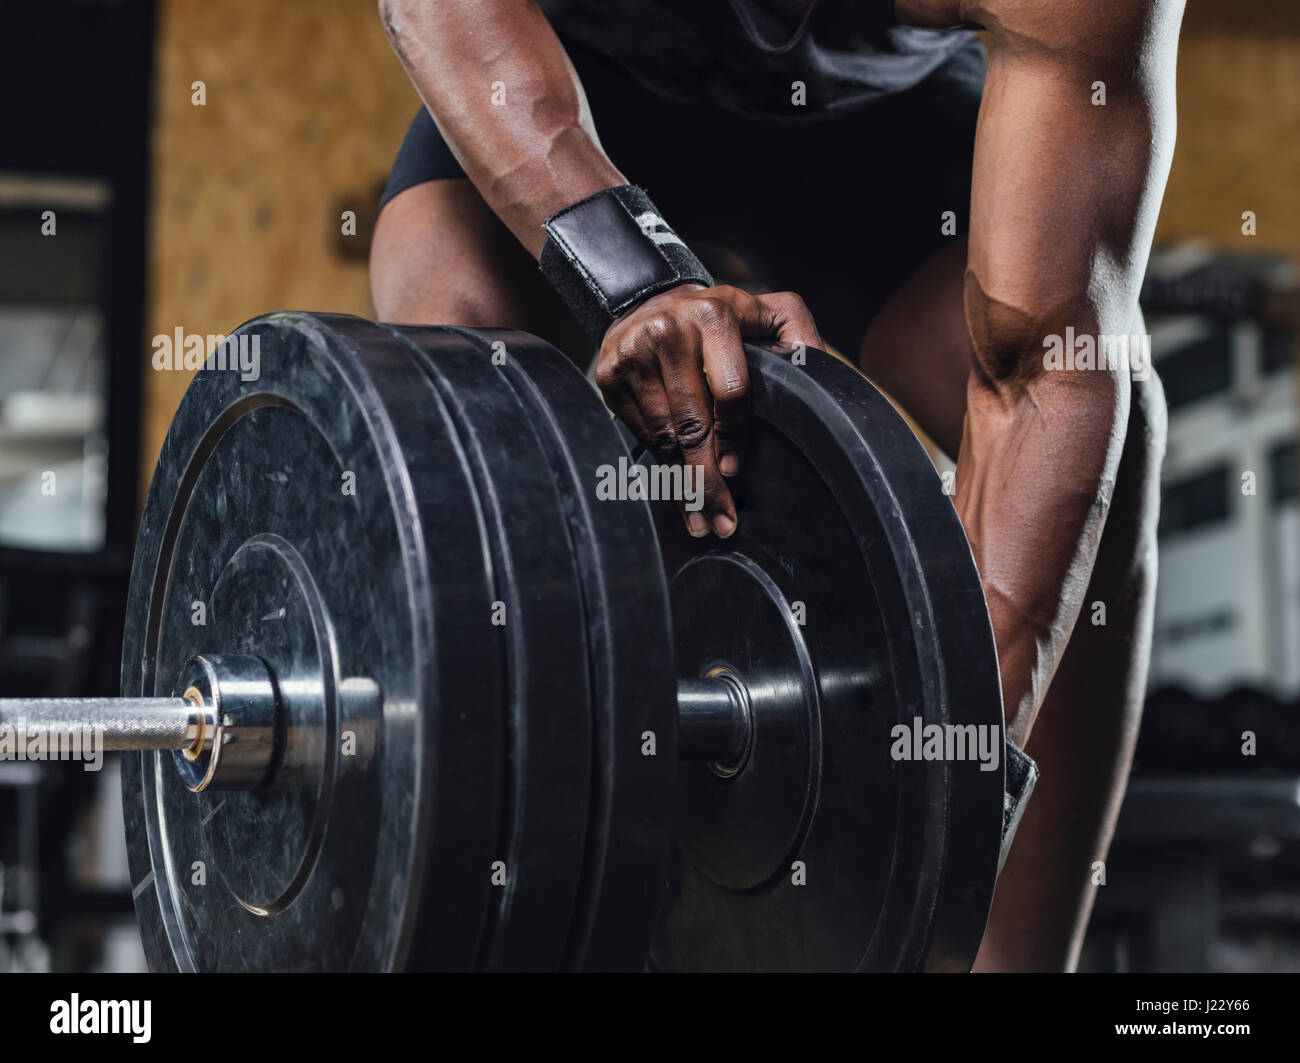 Athlete in gym doing weight lifting Stock Photo